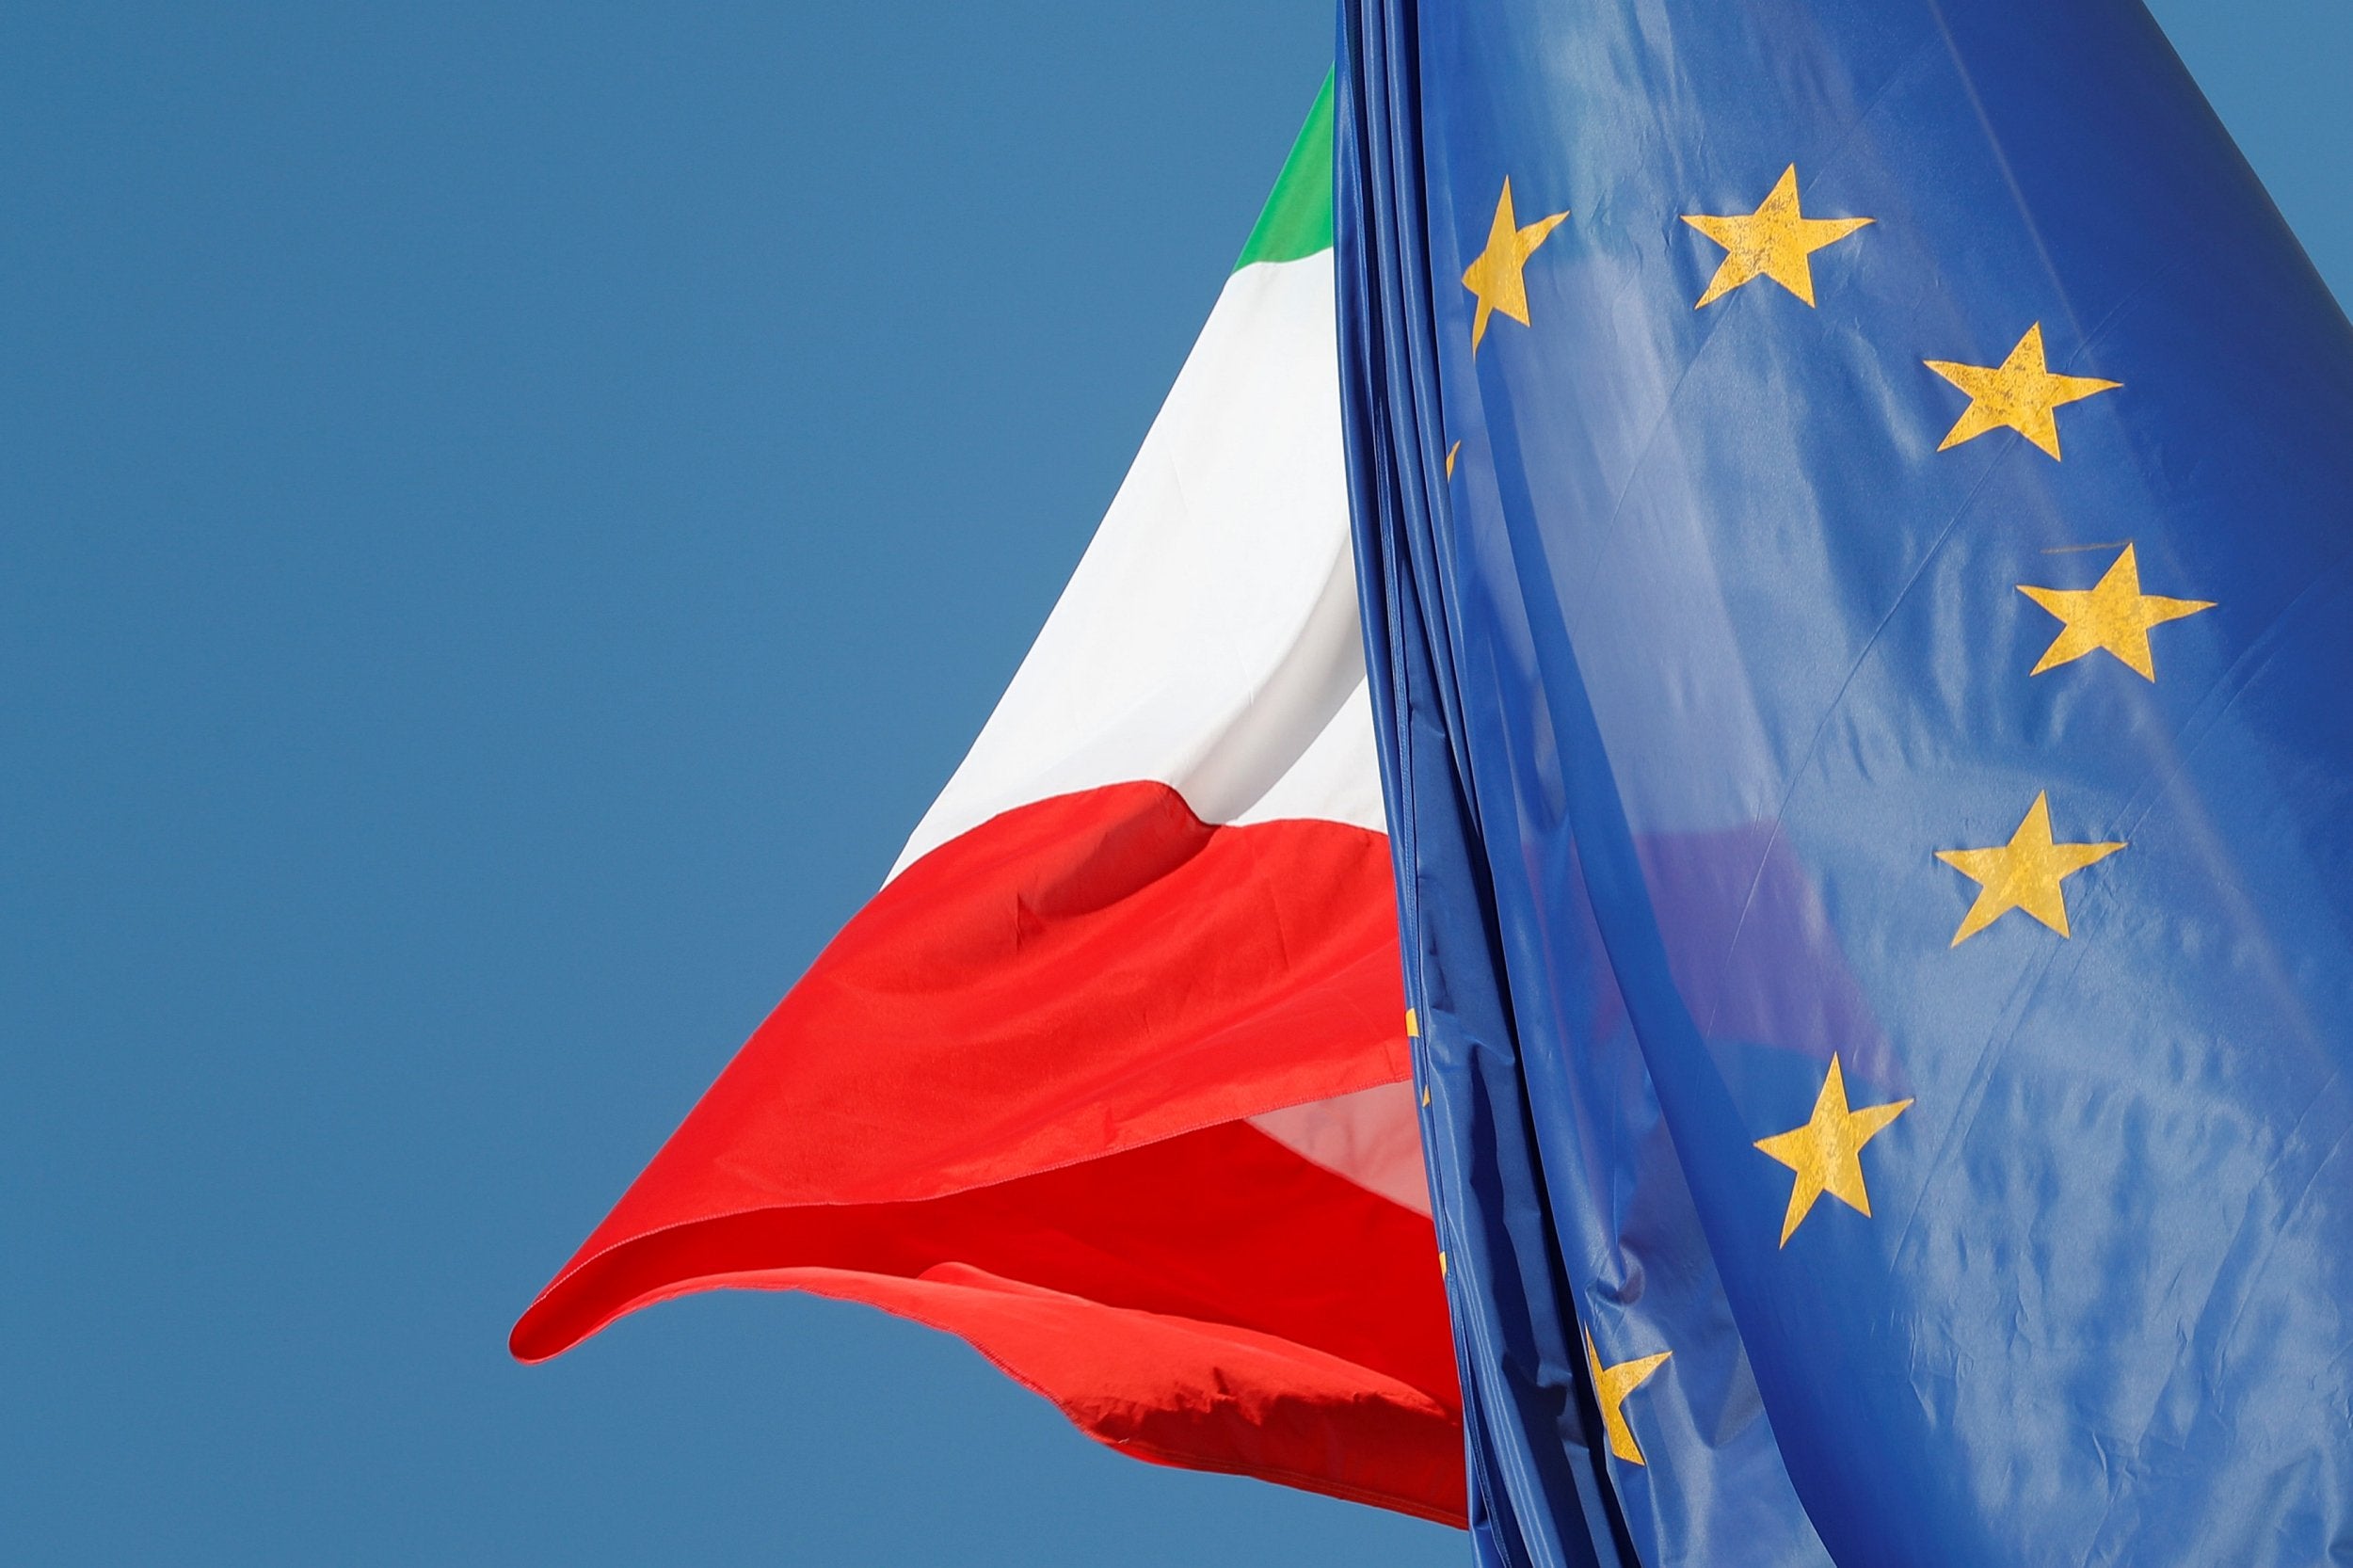 Italy has had its own disagreements with the EU in recent months